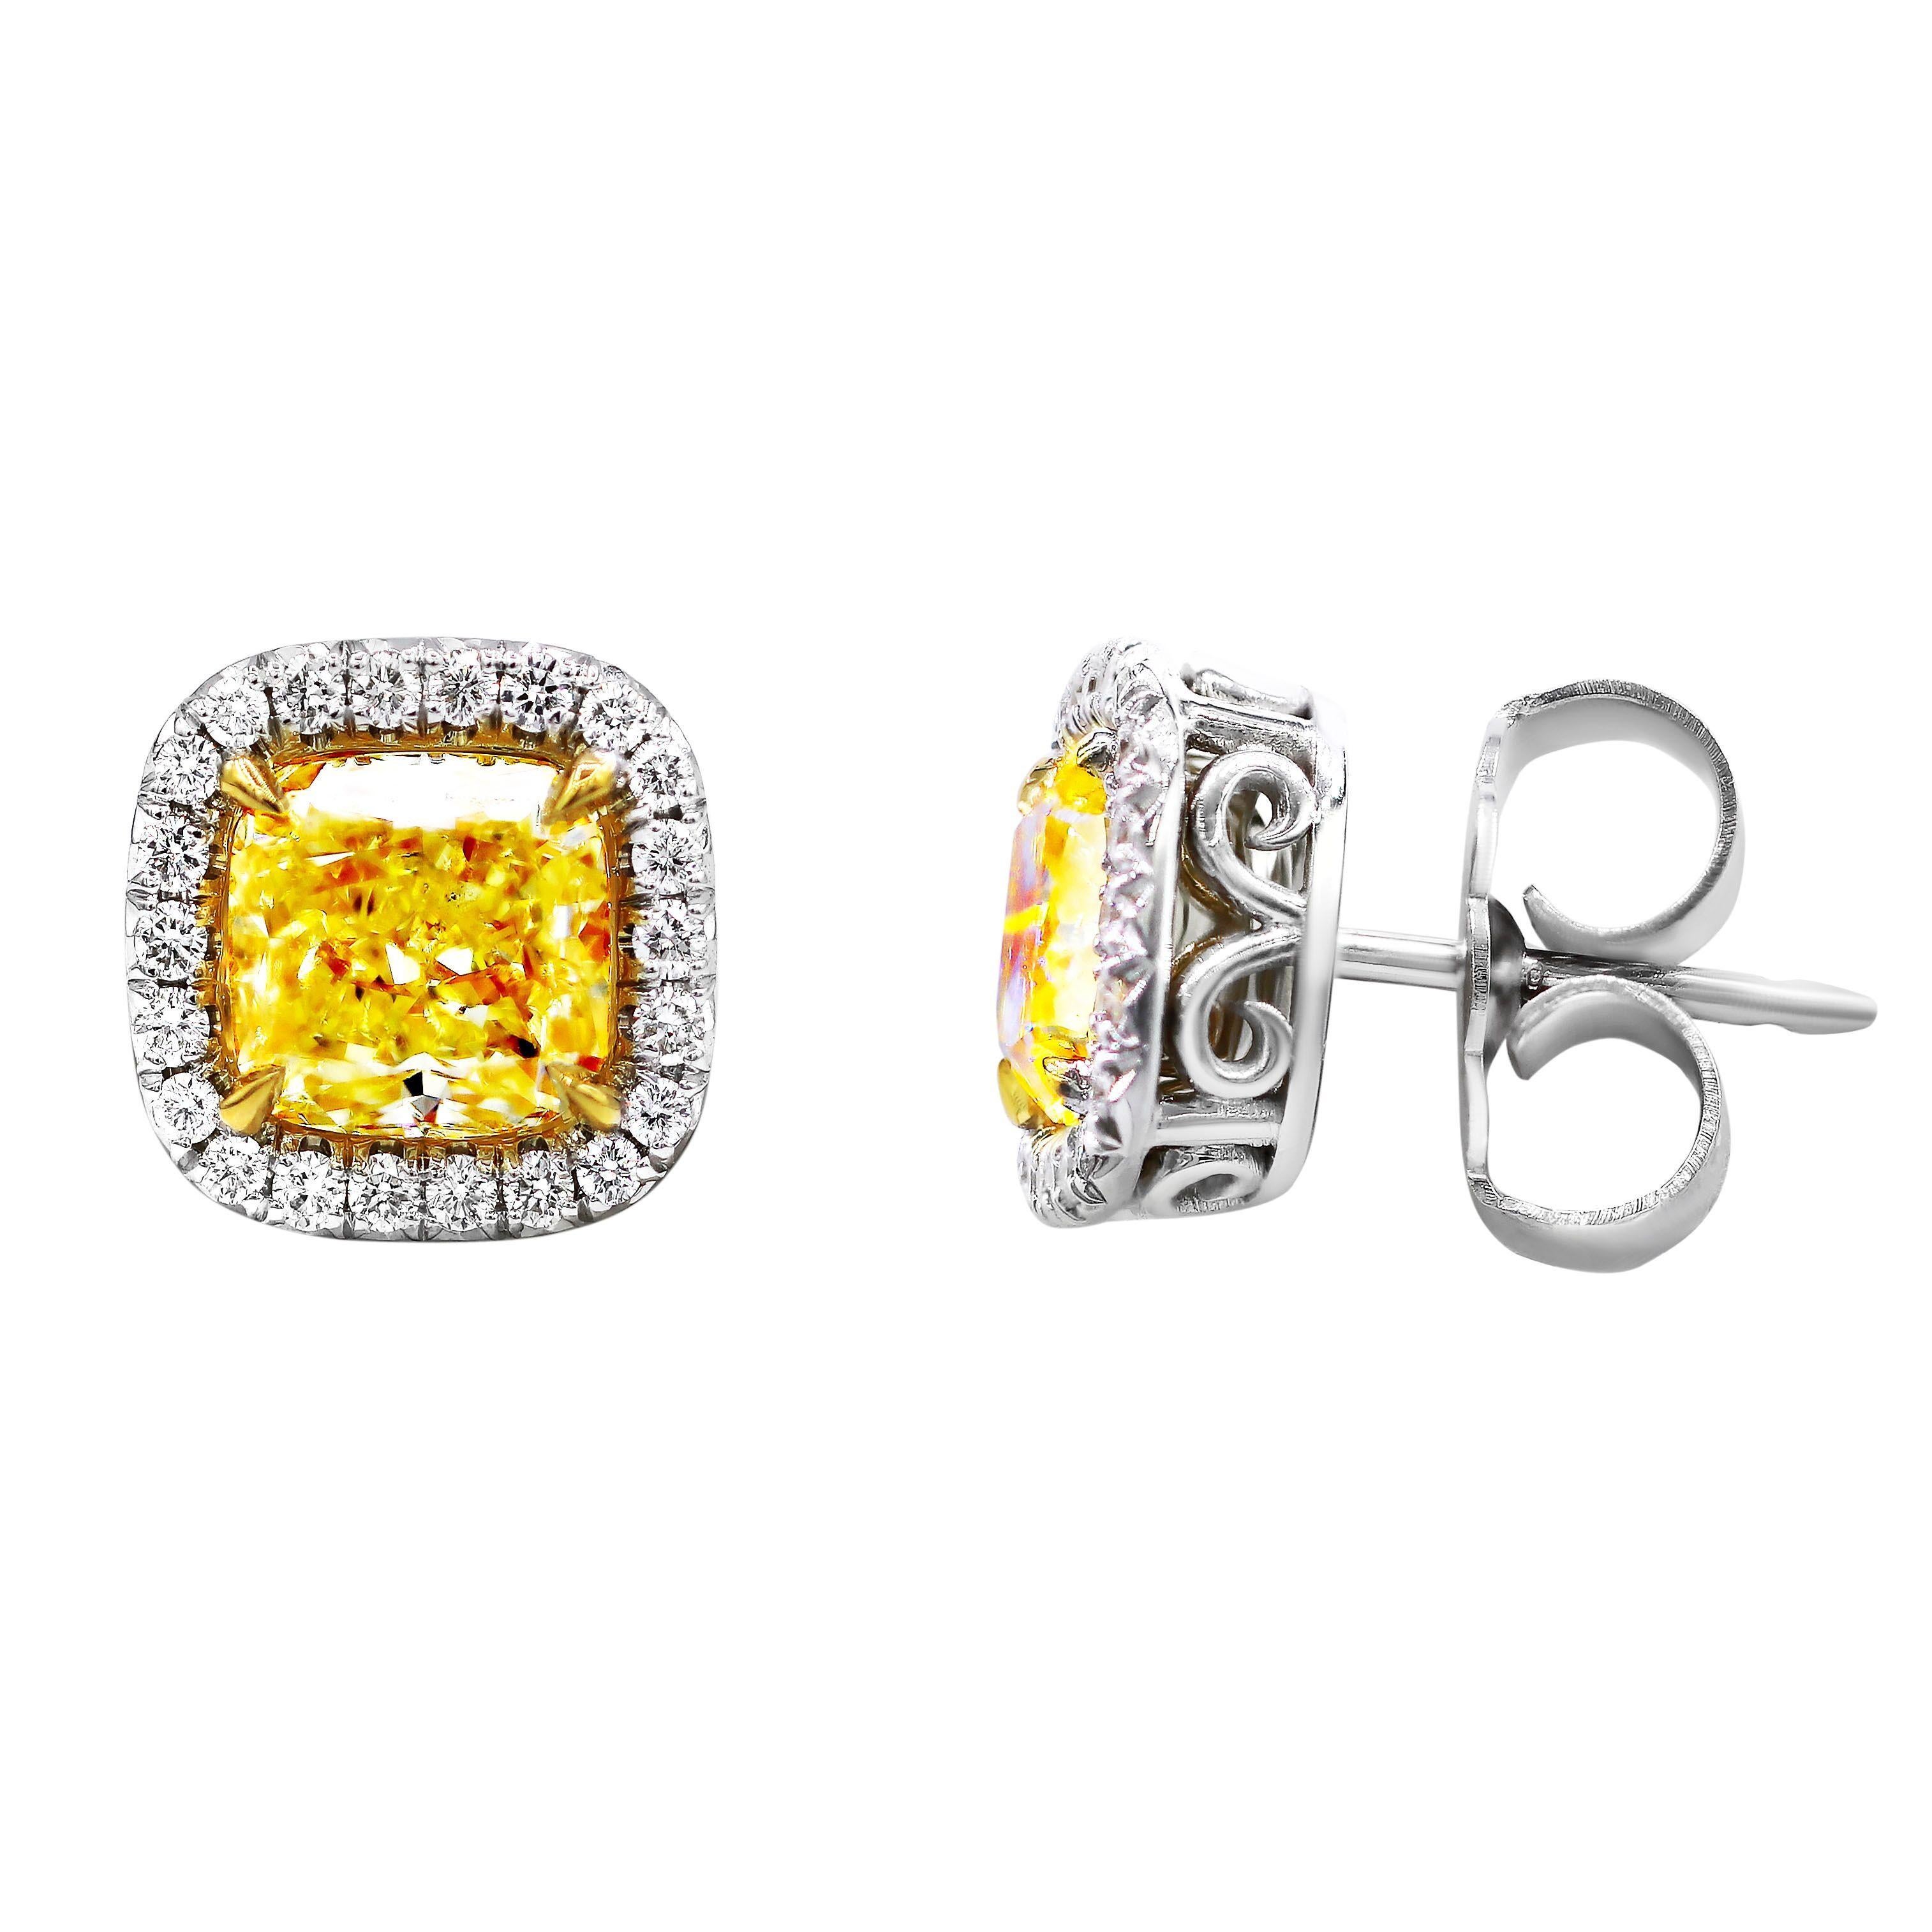 18 karat white and yellow gold halo diamond stud earrings with two GIA certified natural fancy yellow cushion cut diamonds,featuring 2.00 carats/VS2 clarity and 2.00 carats/VS1 clarity and accented by natural round cut diamonds 0.42  total carat